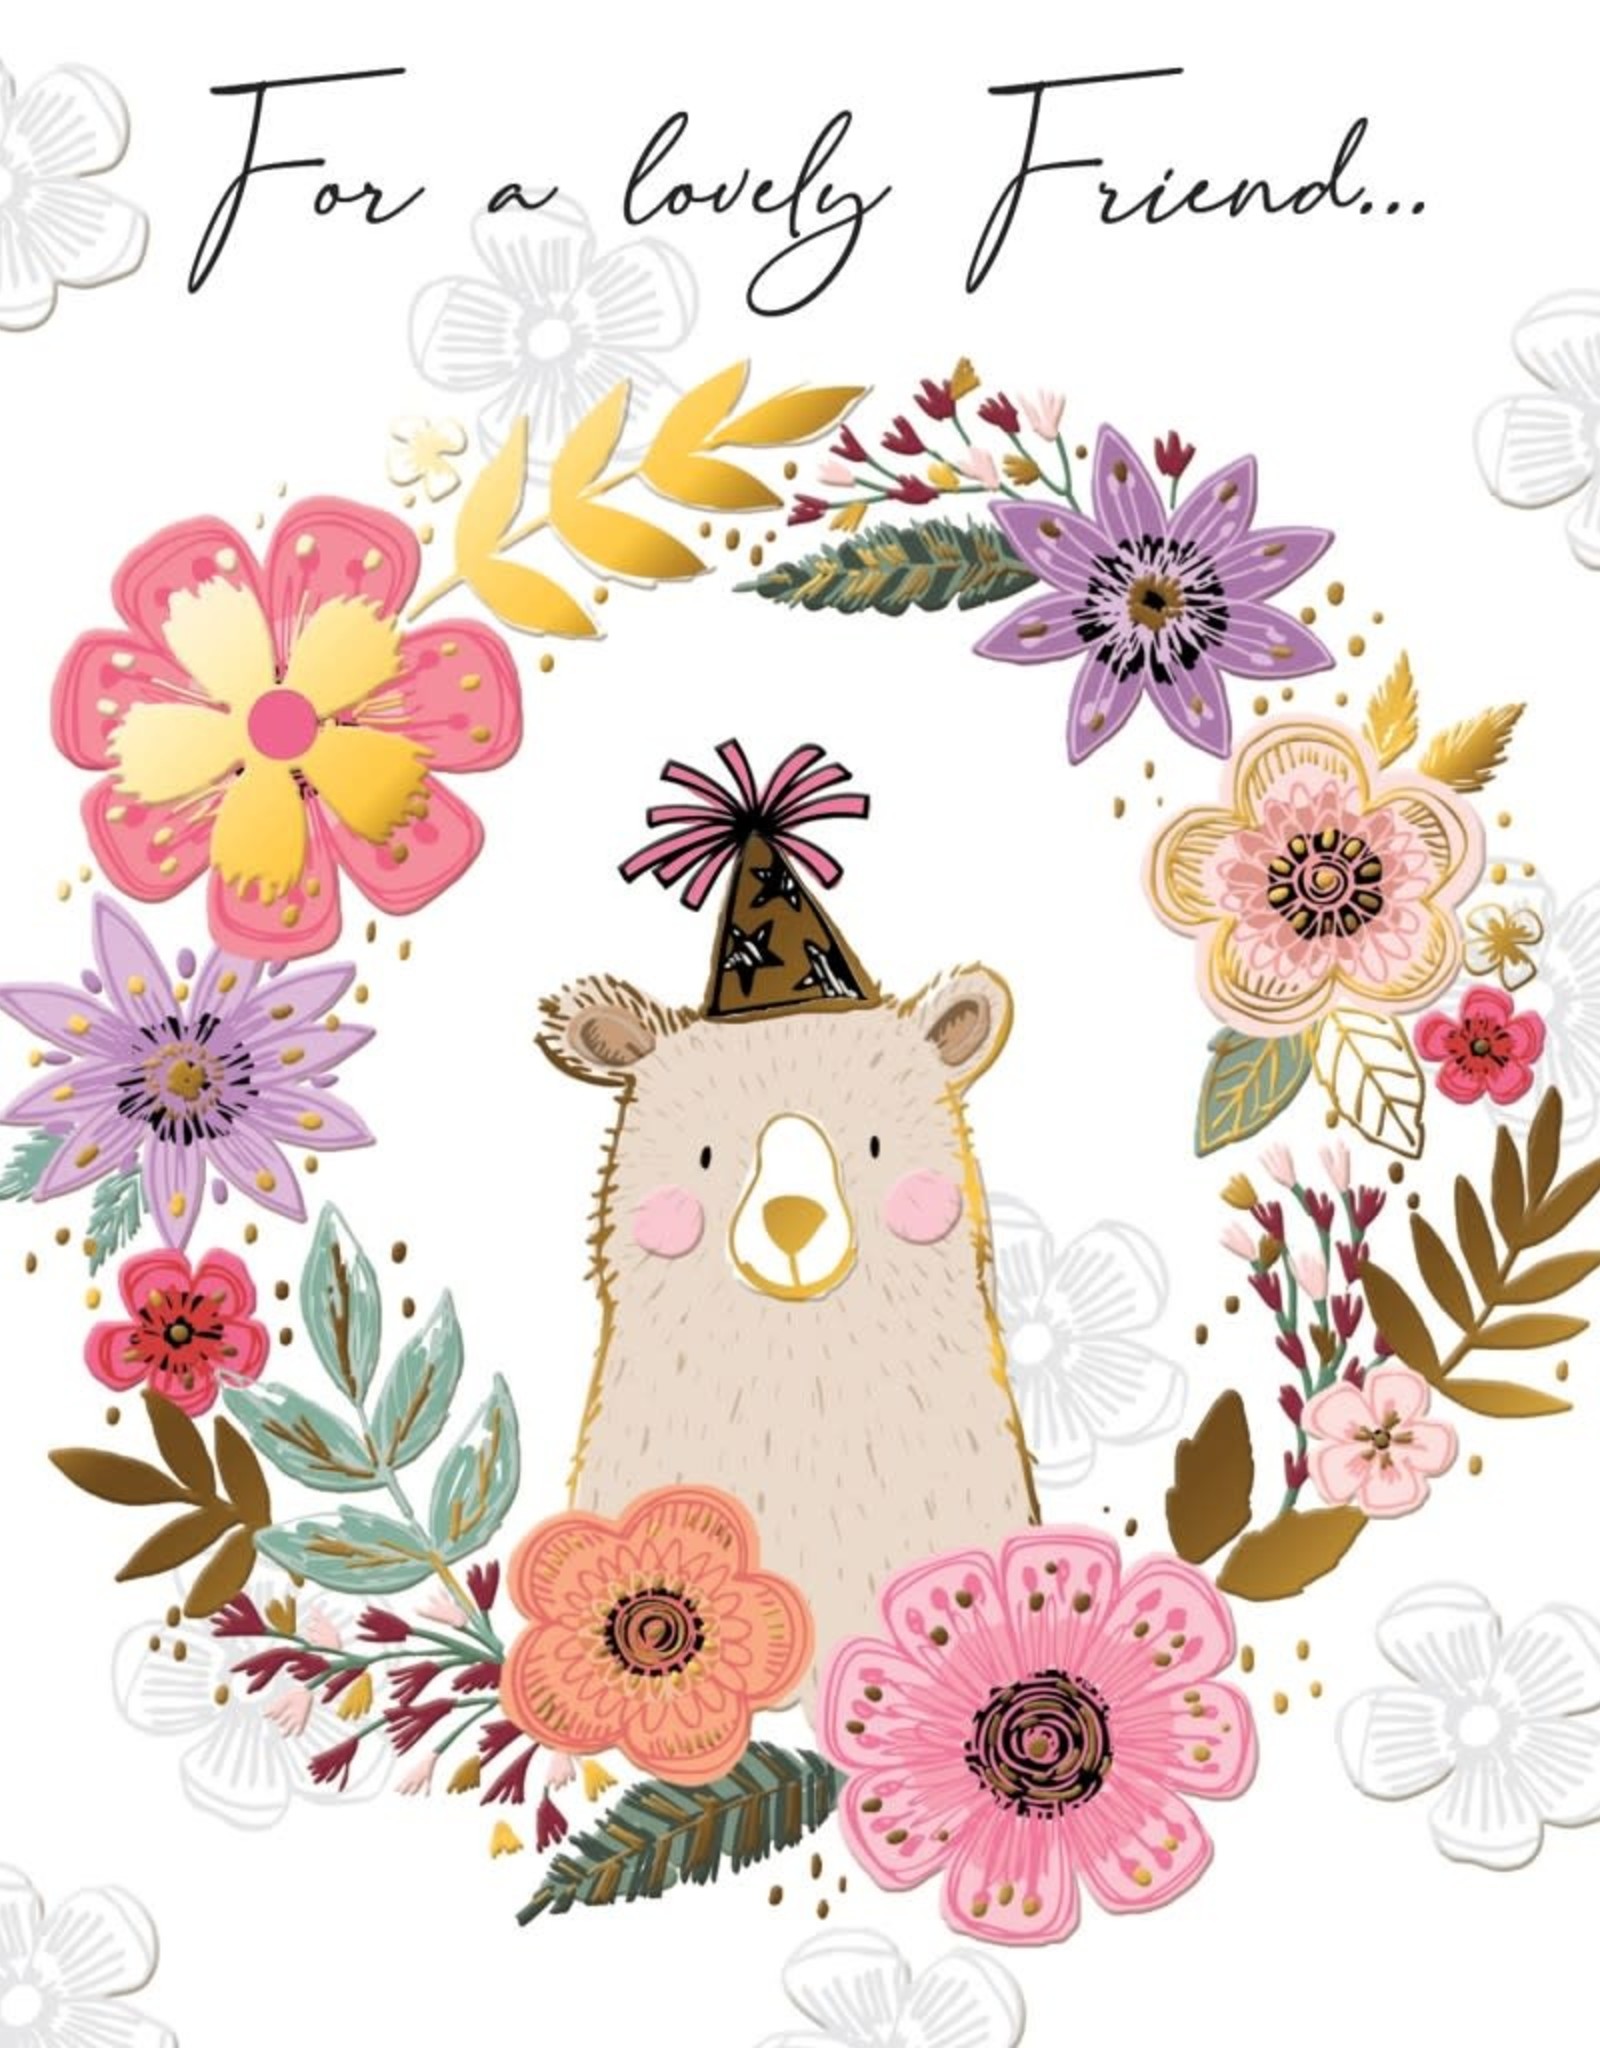 Incognito SUBLIME - FOR A LOVELY FRIEND... - BEAR (6'' x 6'') MESSAGE: … ON YOUR BIRTHDAY. ENJOY EVERY MINUTE OF YOUR SPECIAL DAY.